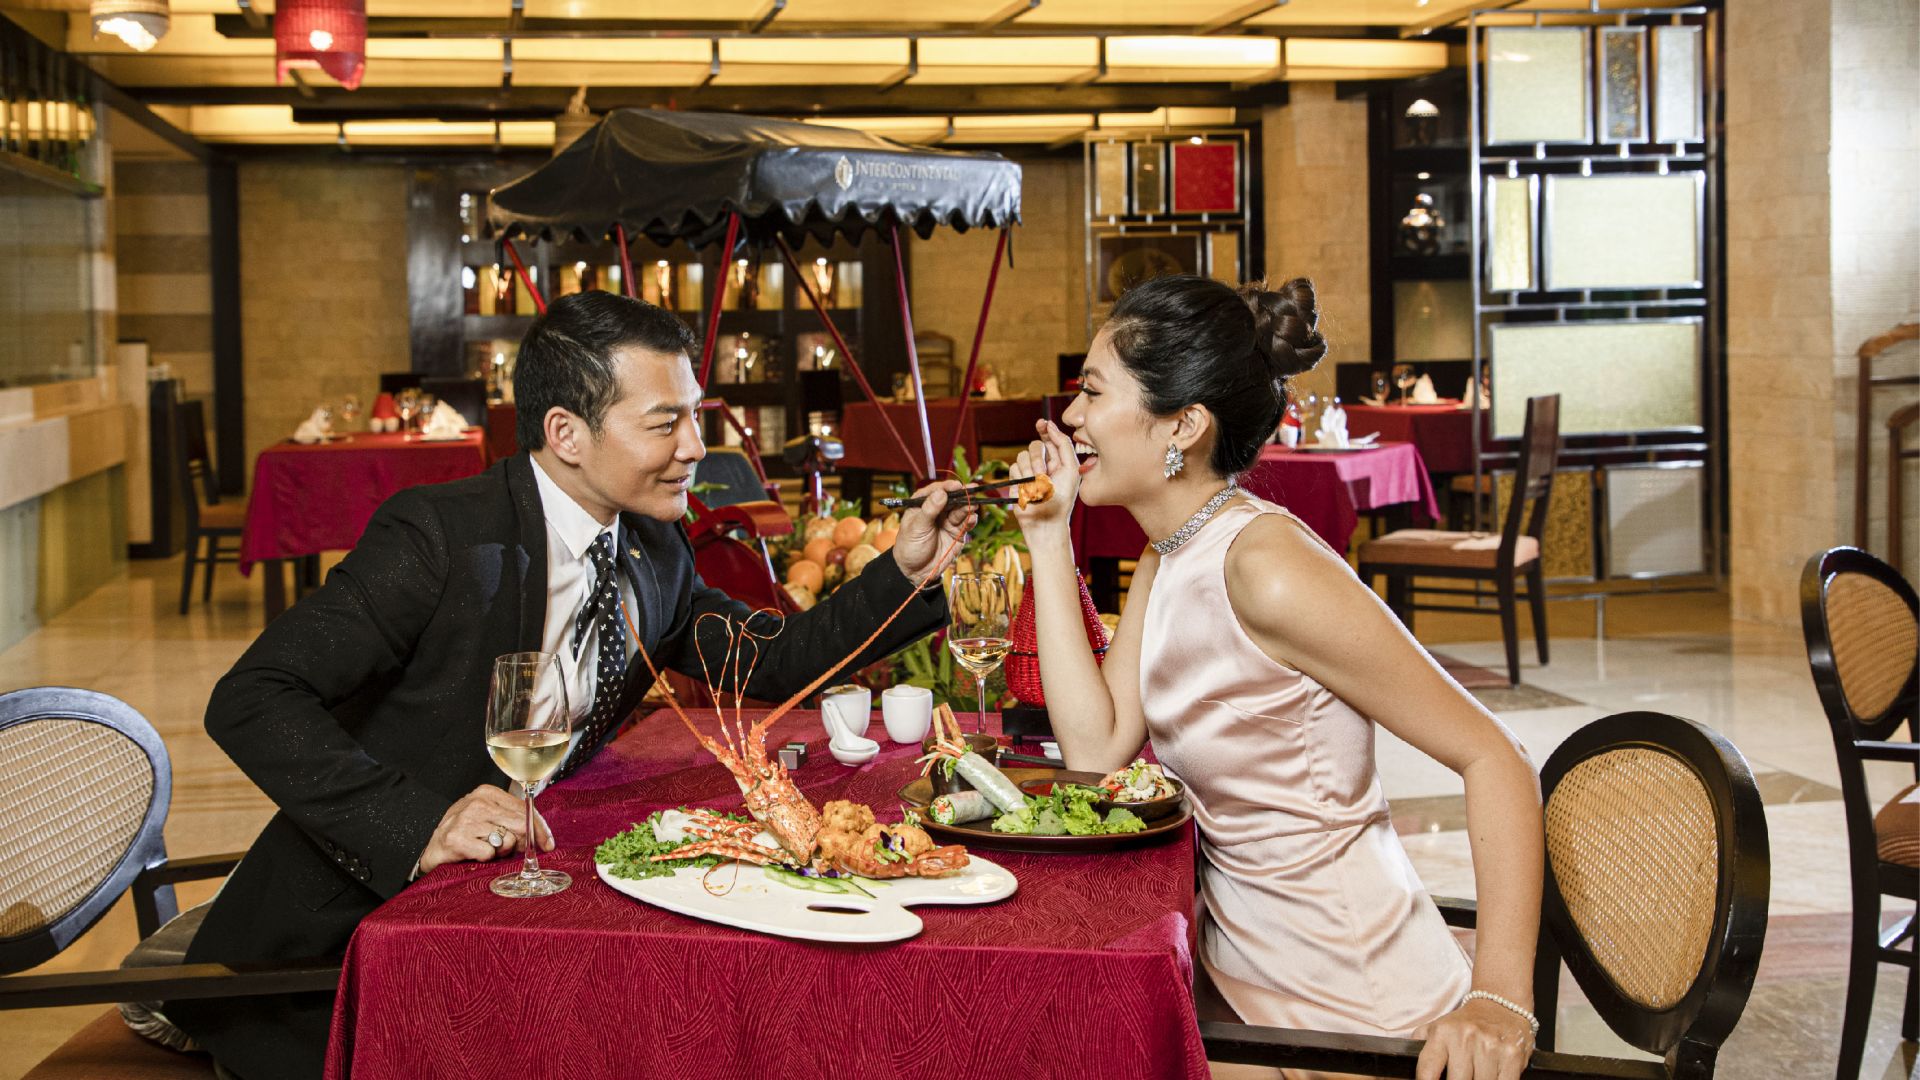 A Man And Woman Eating At A Restaurant